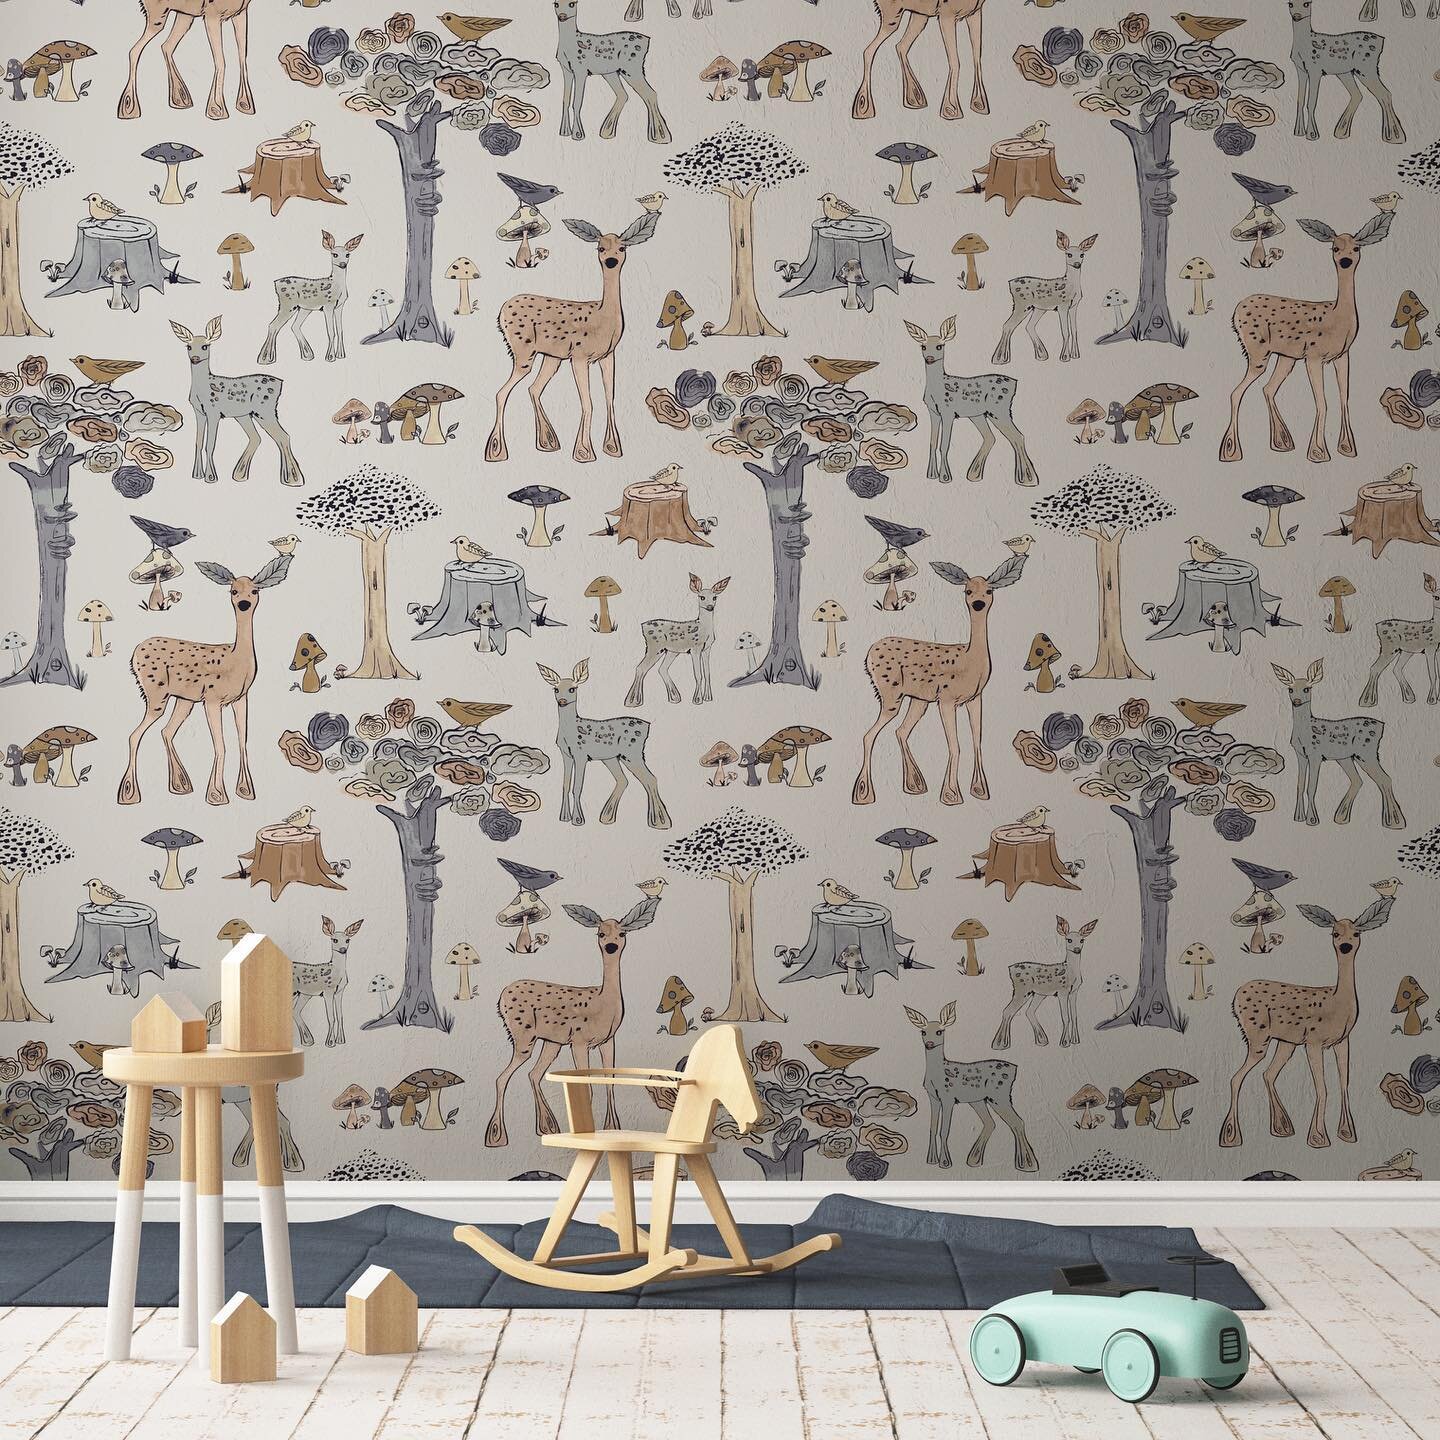 This sweet, magical, nursery room wallpaper was inspired by walks in the woods with my littles. They always spot the enchantment ✨🌟
Available on my spoonflower shop in the coming weeks. 
.
.
.
.
.
.
.
.
.
.
.
.
#woodland #fawn #kidswallpaper #nurser